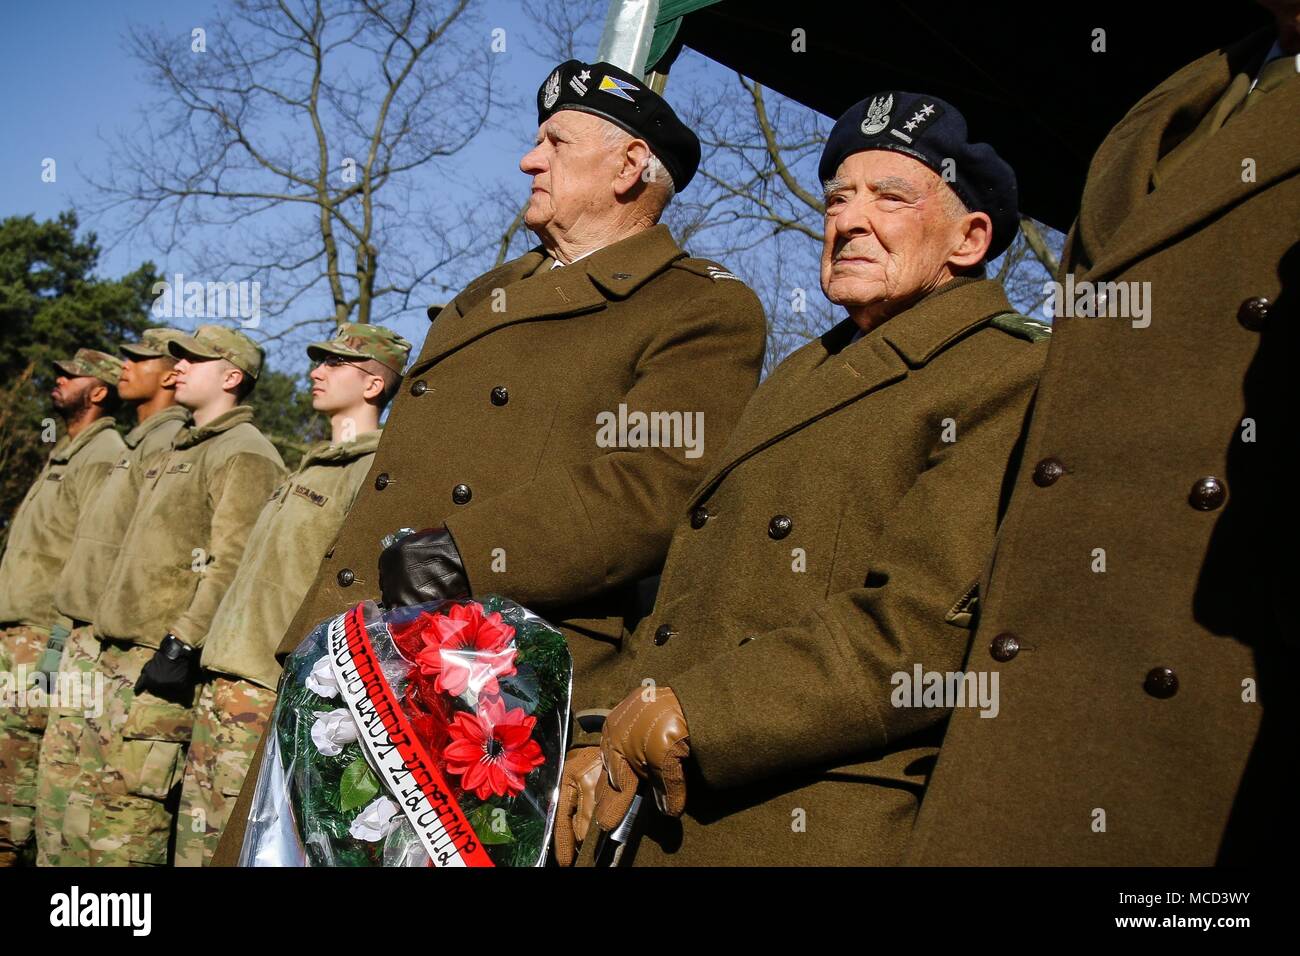 Former Polish army 2nd Lt. Piotr Gubernator (right), a World War II veteran, waits to present a wreath of flowers with fellow veterans during a ceremony to remember the 73rd anniversary of the Battle of Zagan outside of the Stalag Luft III Prisoner Camp Museum in Zagan, Poland on Feb. 16, 2018. (U.S. Army photo by Spc. Hubert D. Delany III / 22nd Mobile Public Affairs Detachment) Stock Photo